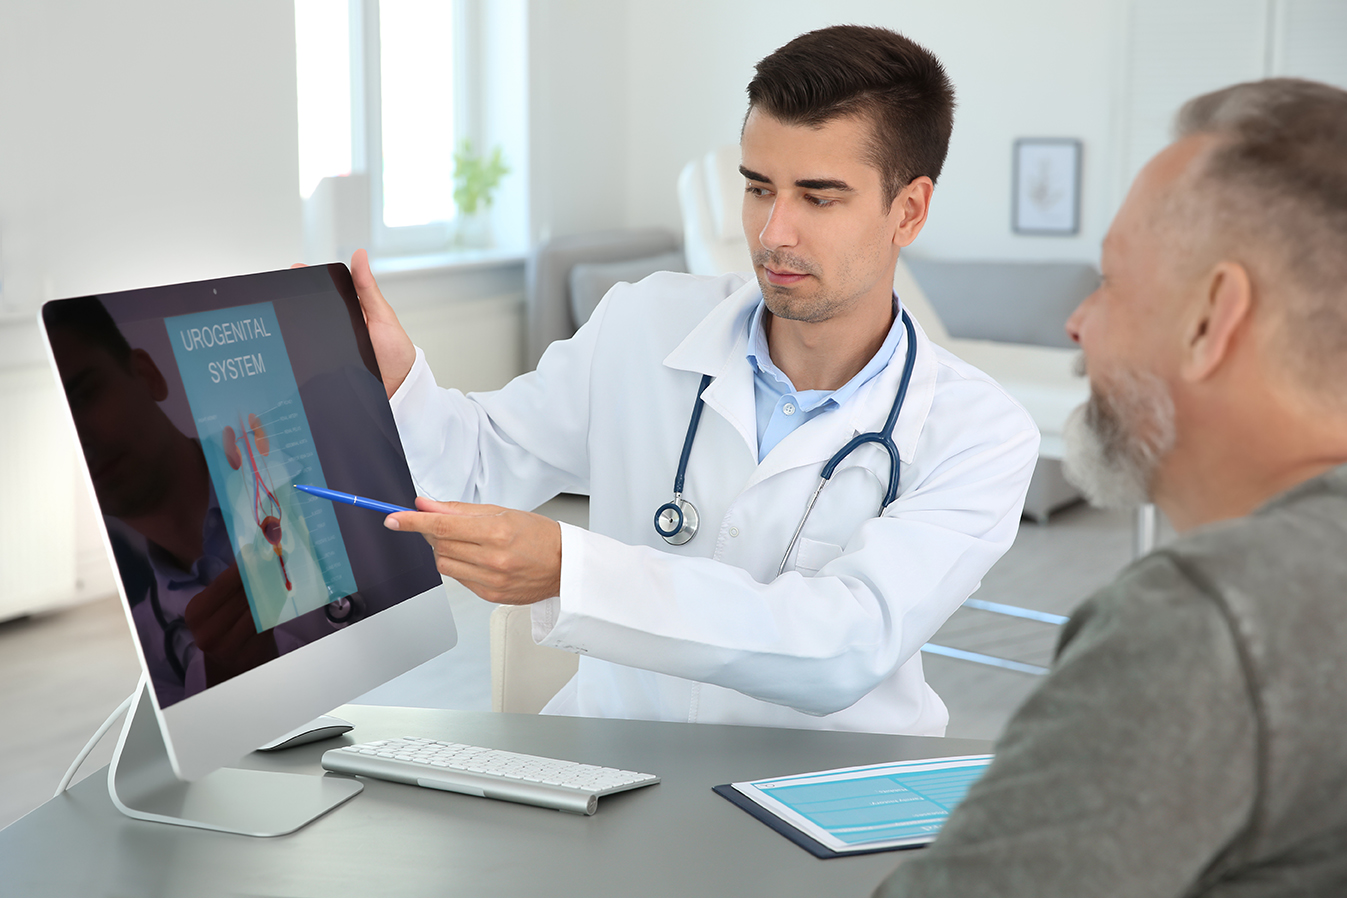 Background image : urologist showing a patient the urogenital system